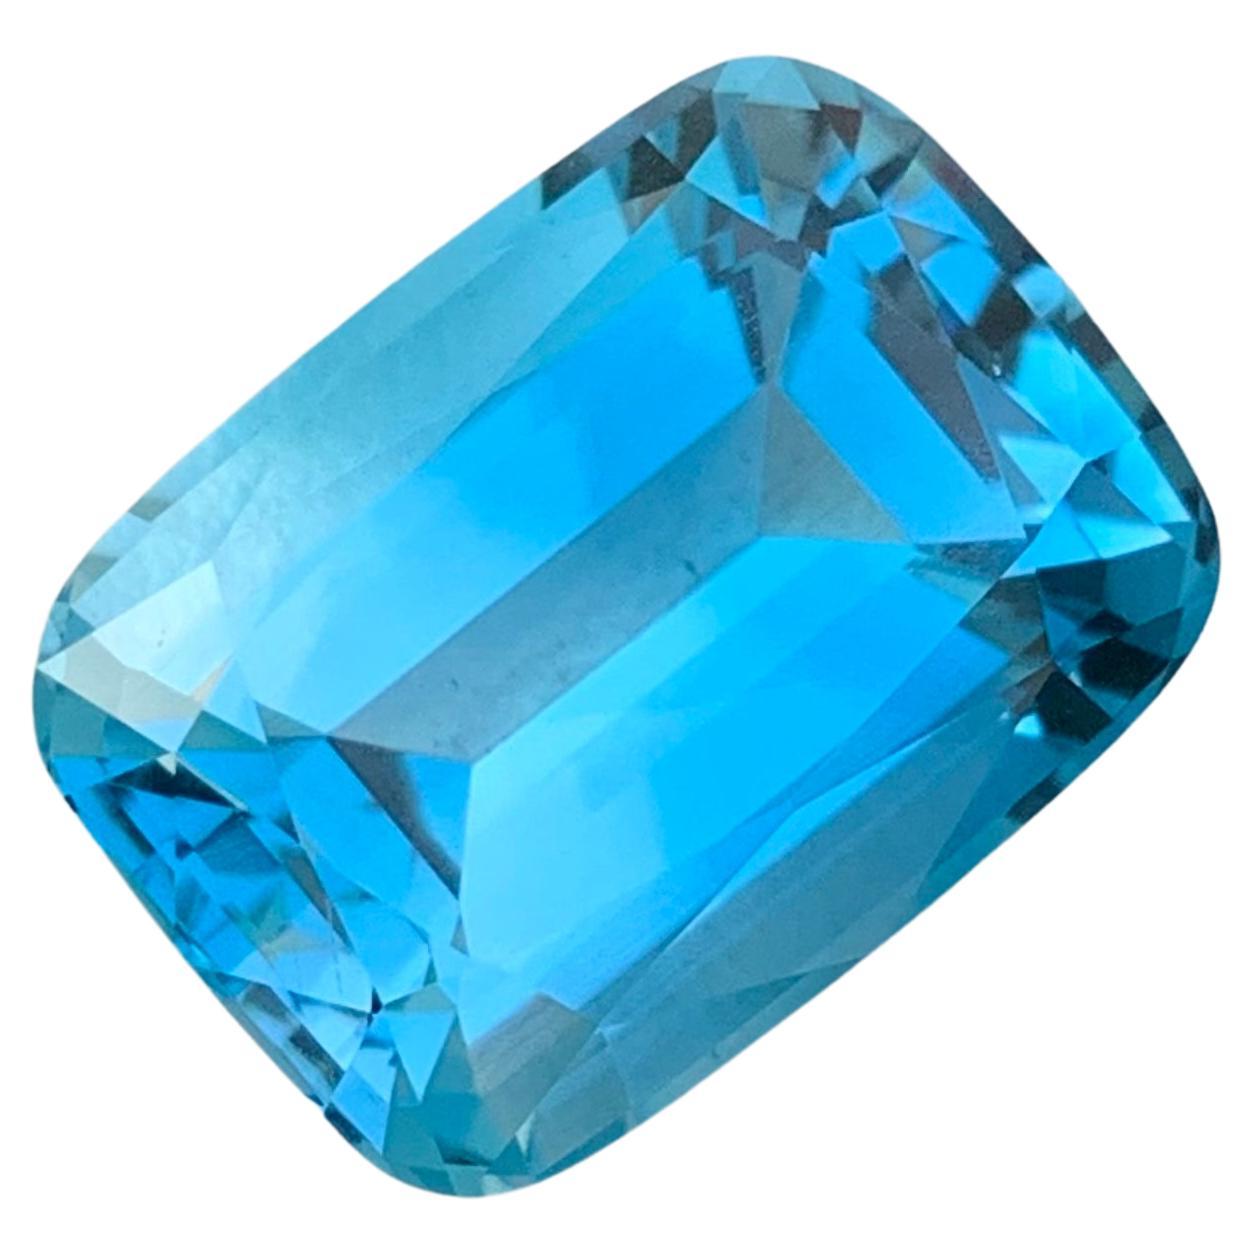 Gorgeous 14.95 Cts Faceted Blue Topaz Gemstone Long Cushion Cut From Brazil Mine For Sale